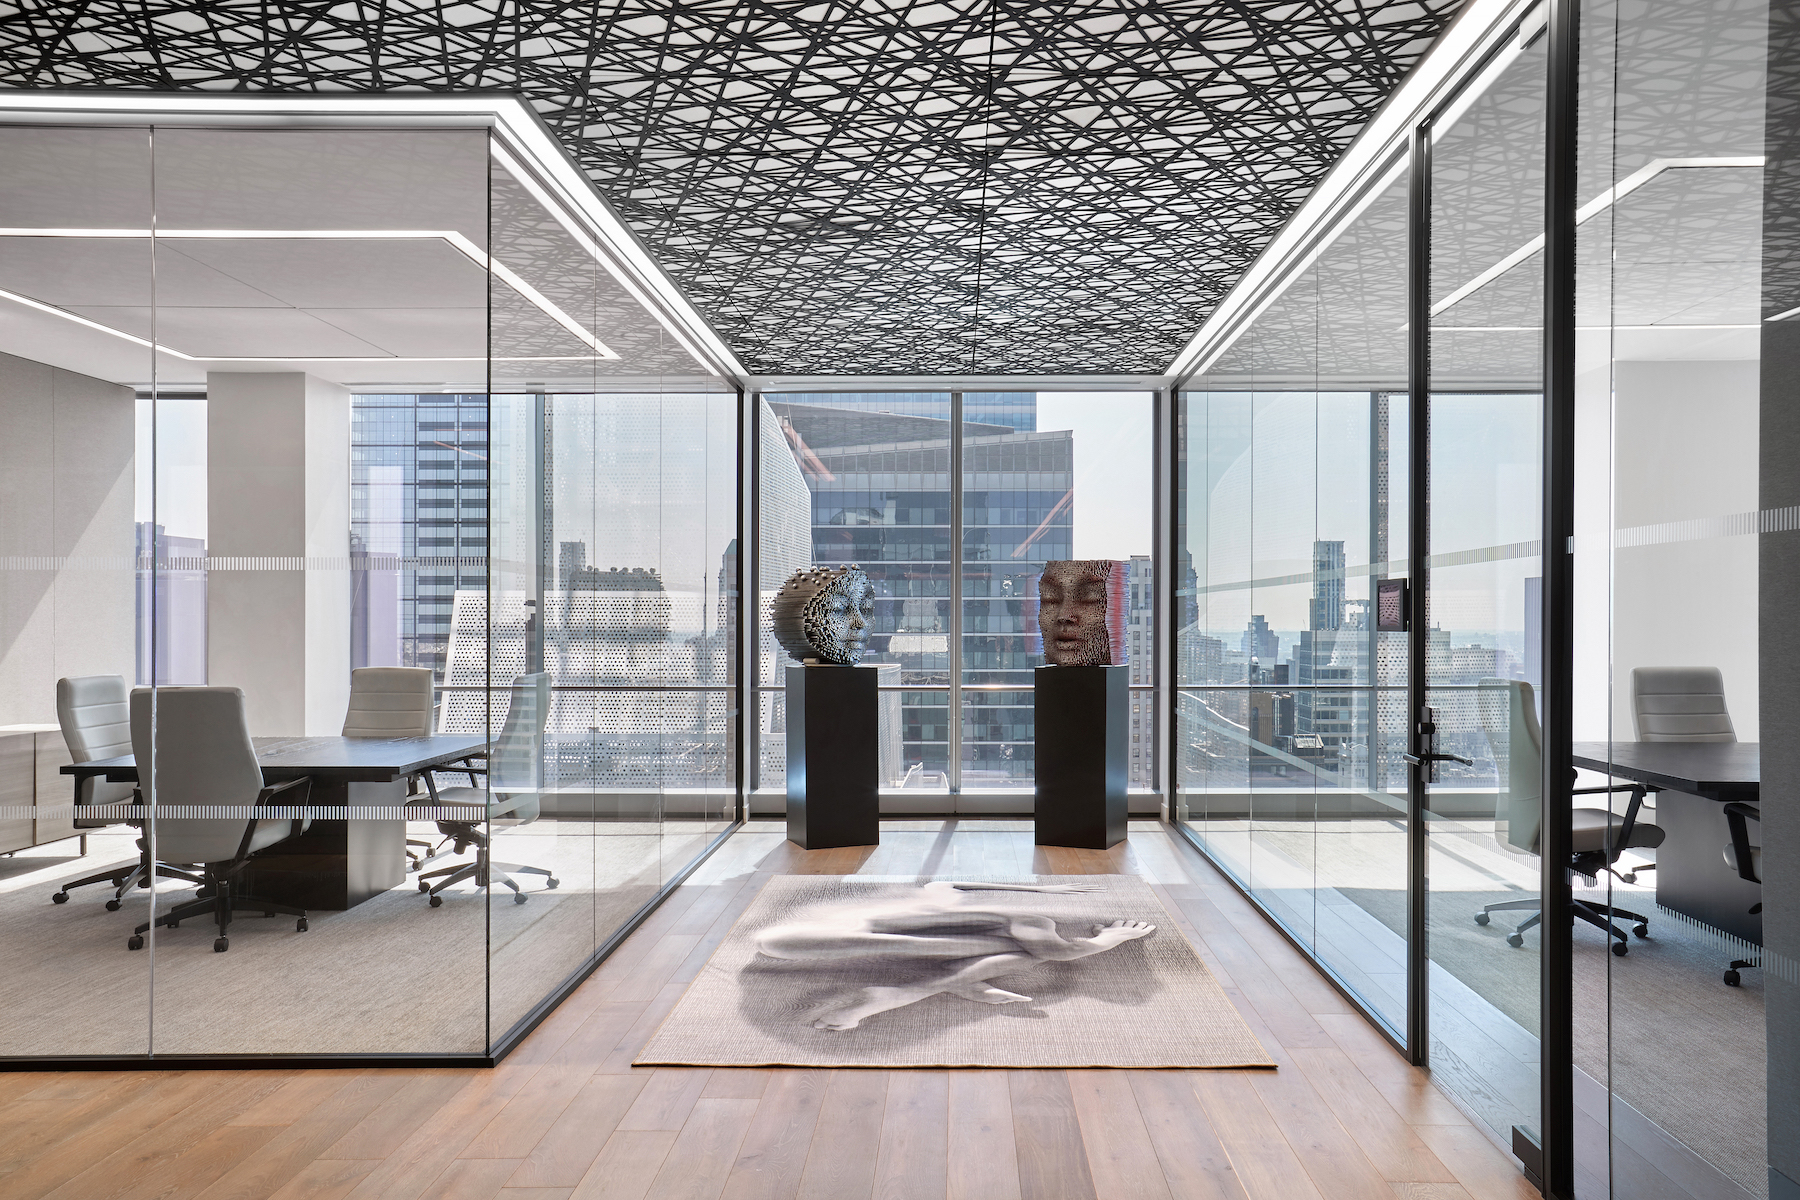 Ducera's office exhibits the firm's art work. Image: Courtesy of Ted Moudis Associates